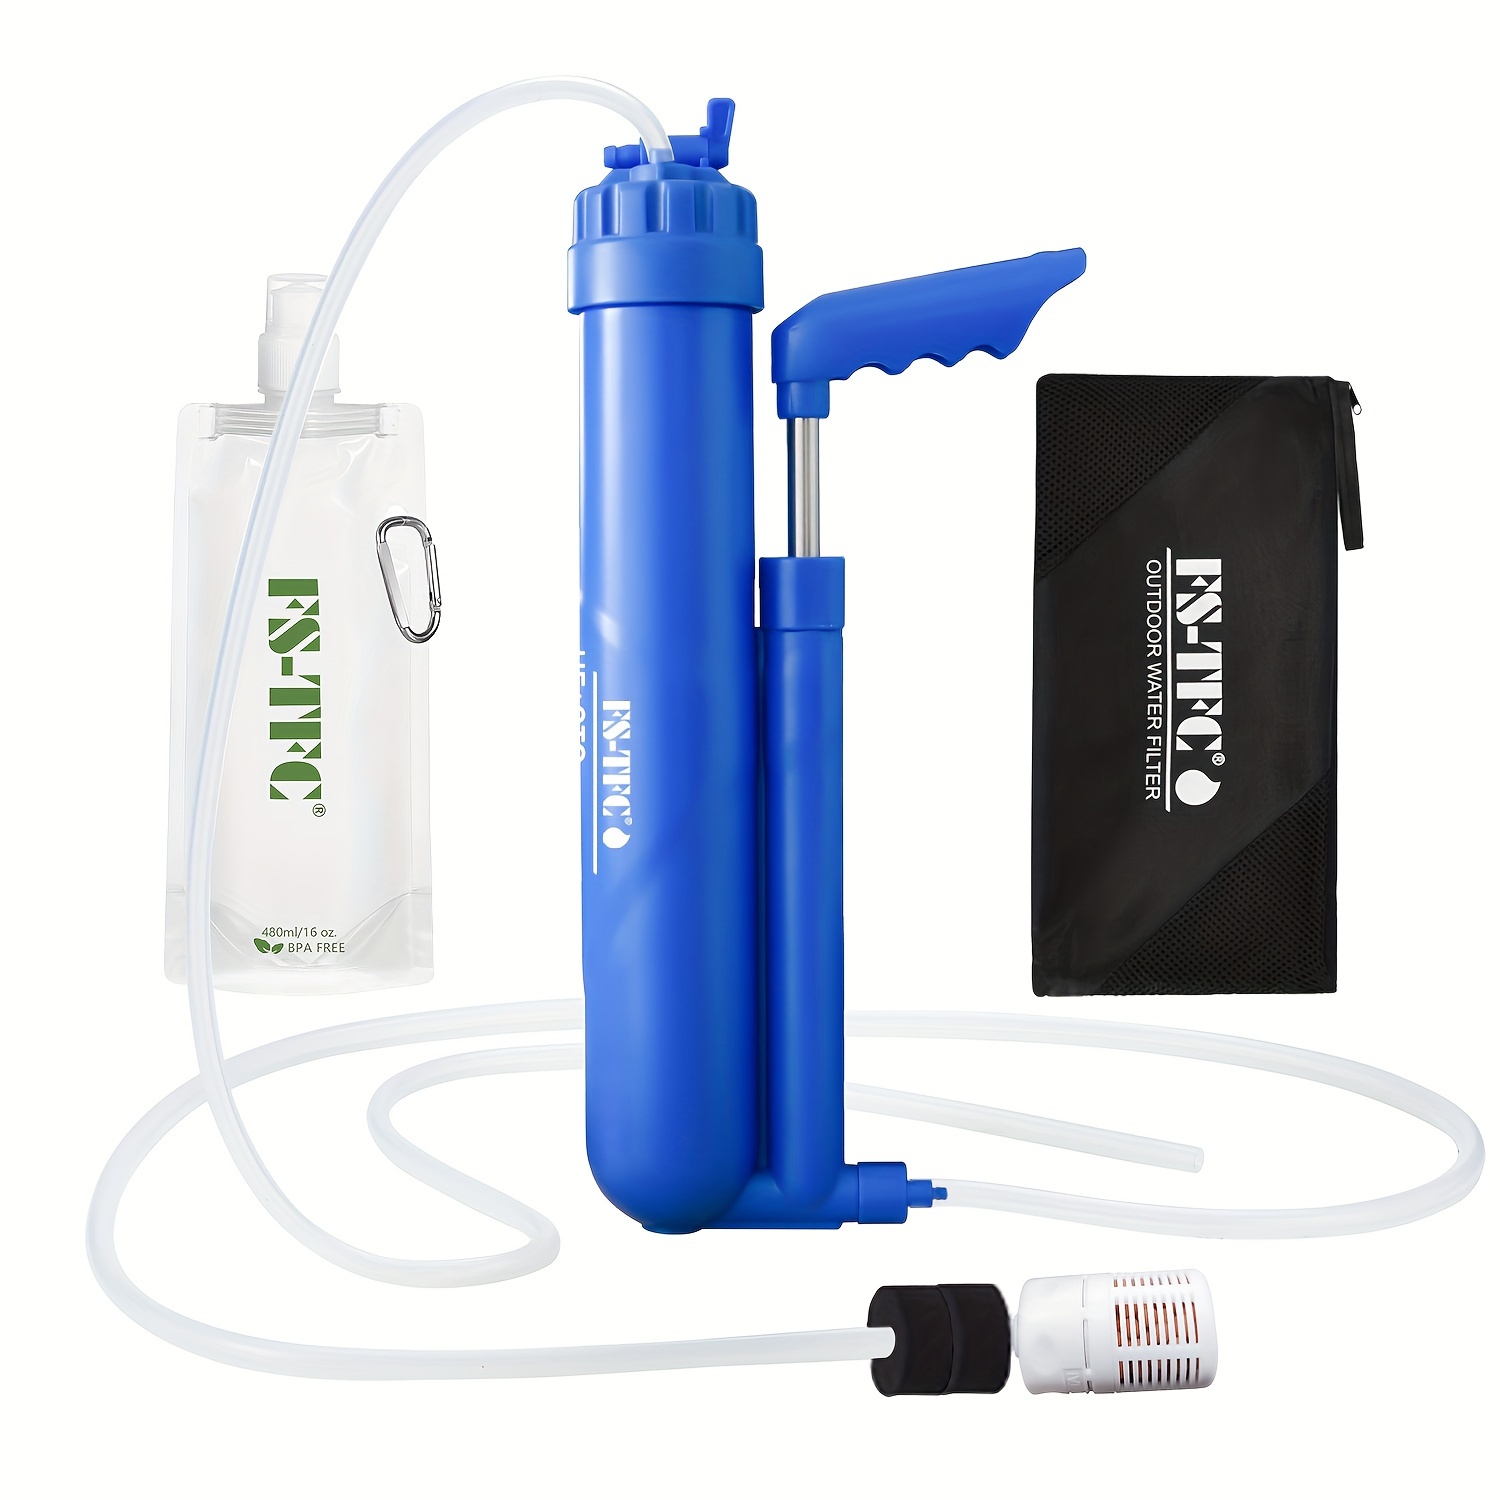 

1pc 6-stage Portable Water Filter 0.01 Micron Uf And Cto Improving Tastes Water Purifier Survival Gear 1.5l/min Fast Flow For Hiking, Camping, Travel, And Emergency Preparedness